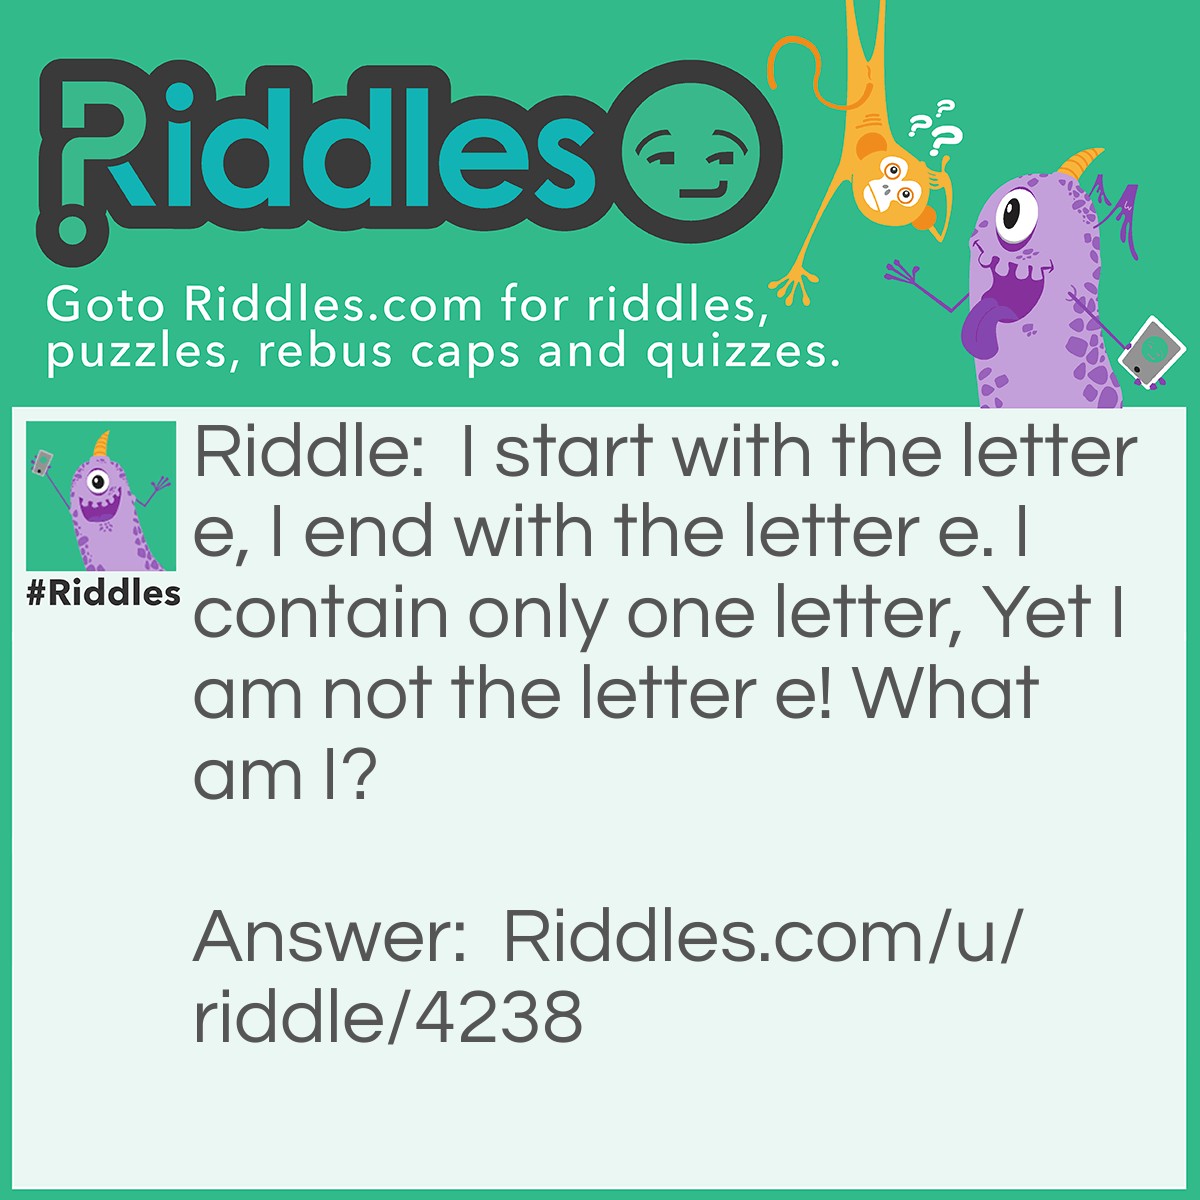 Riddle: I start with the letter e, I end with the letter e. I contain only one letter, Yet I am not the letter e! What am I? Answer: An envelope.